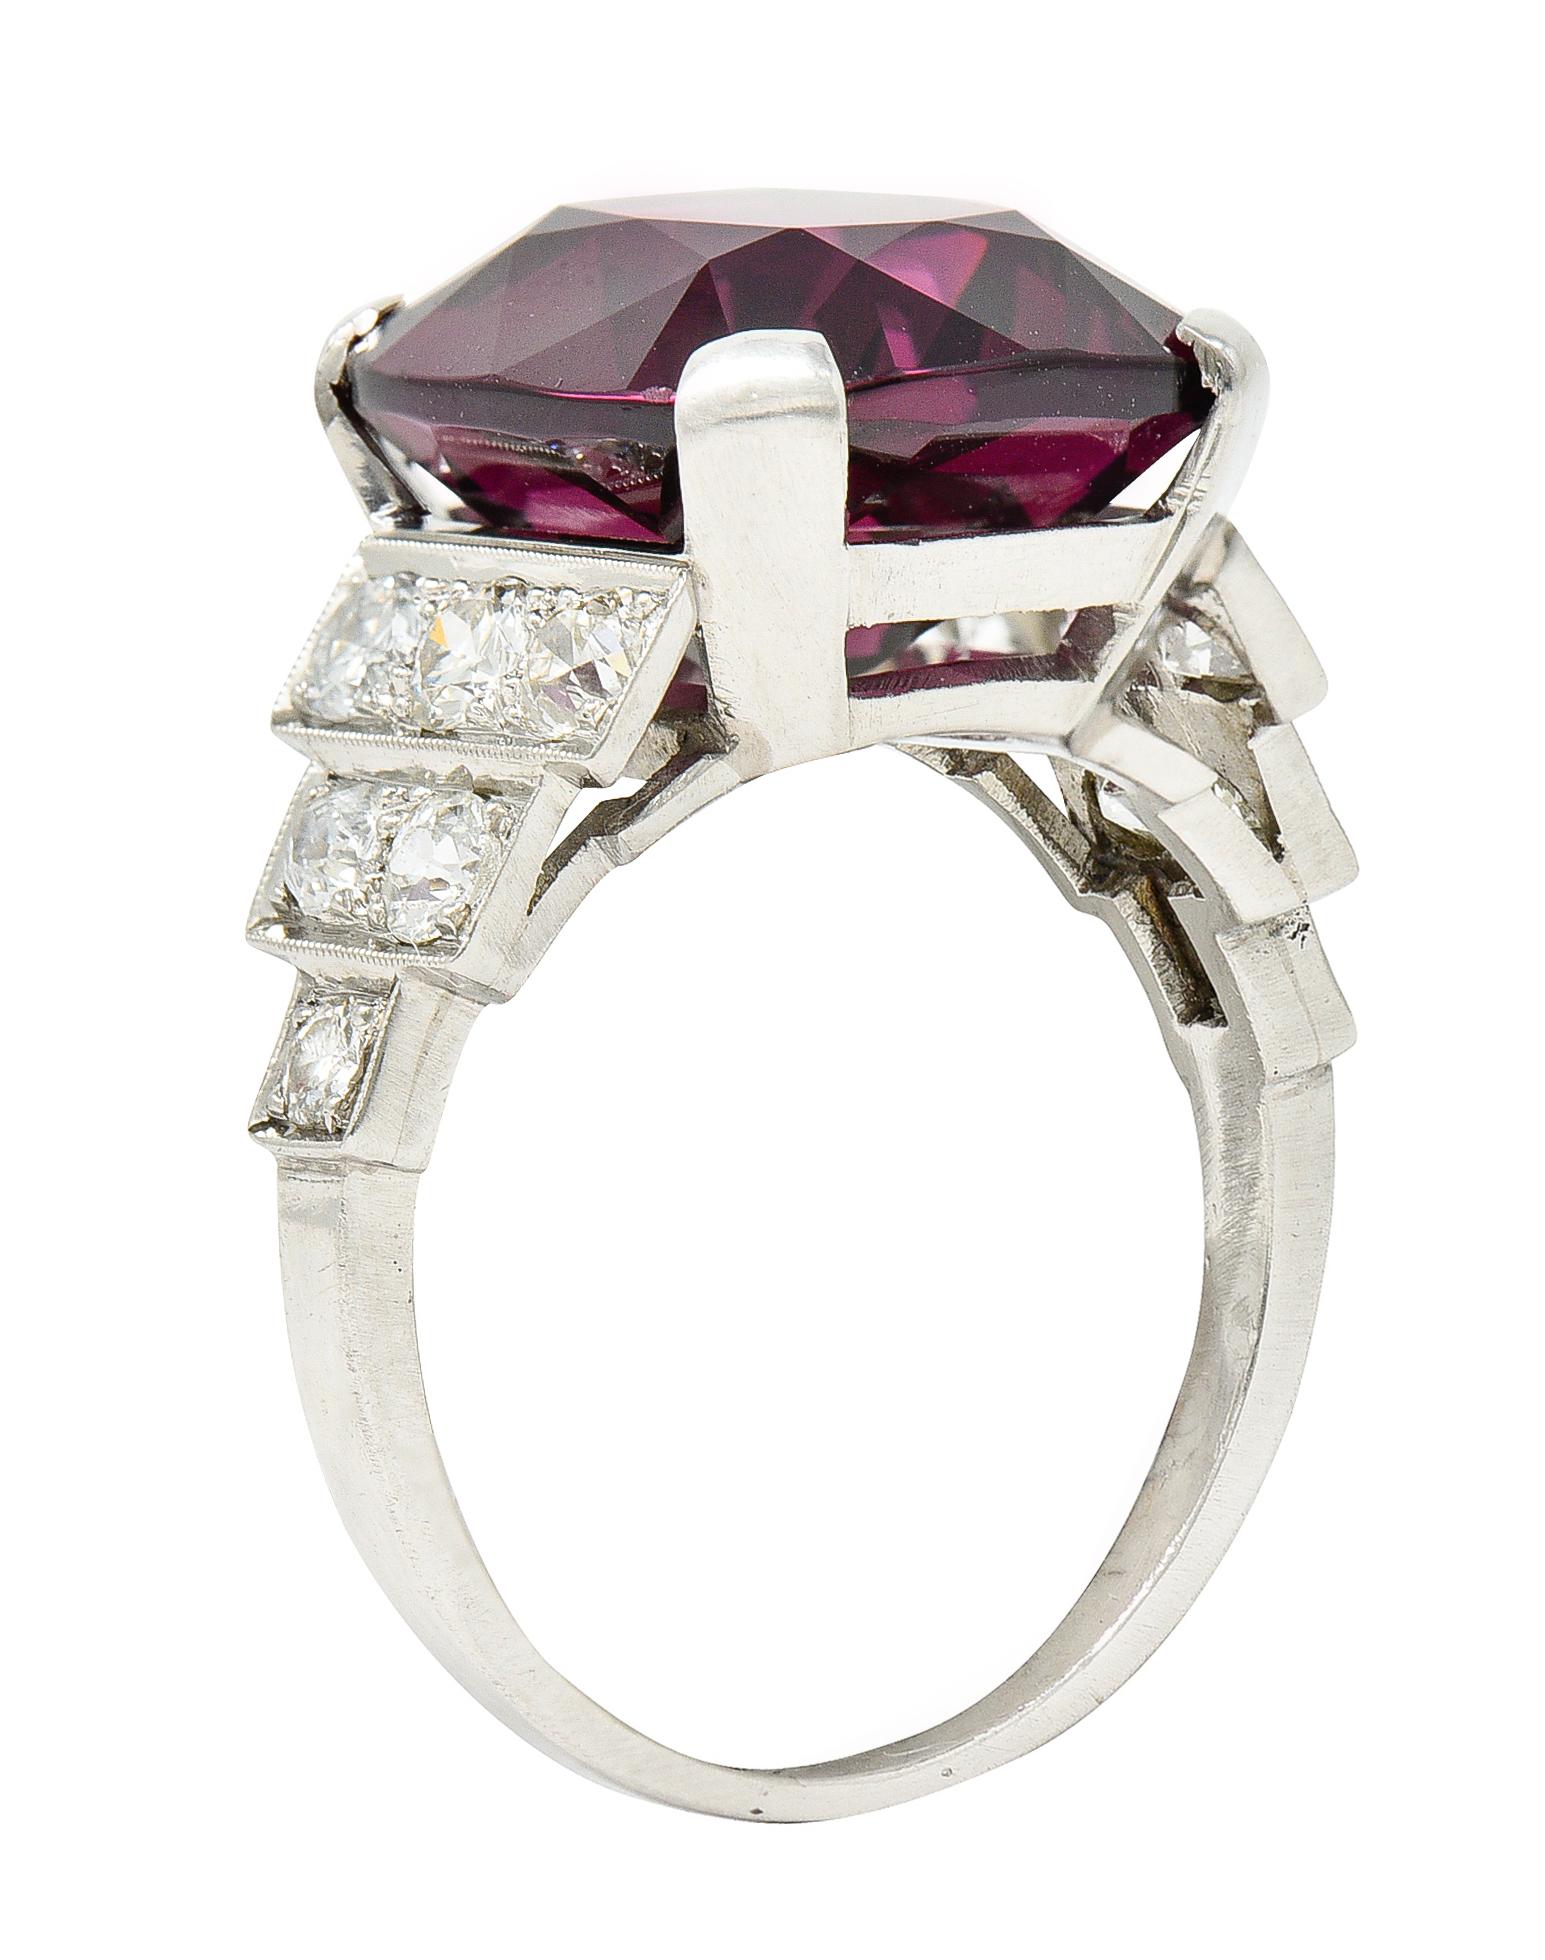 Cathedral basket ring centers a substantial cushion cut spinel

Weighing approximately 11.71 carats with saturated medium dark and strongly purplish red color

Flanked by tiered shoulders accented by milgrain details

Set with old European and